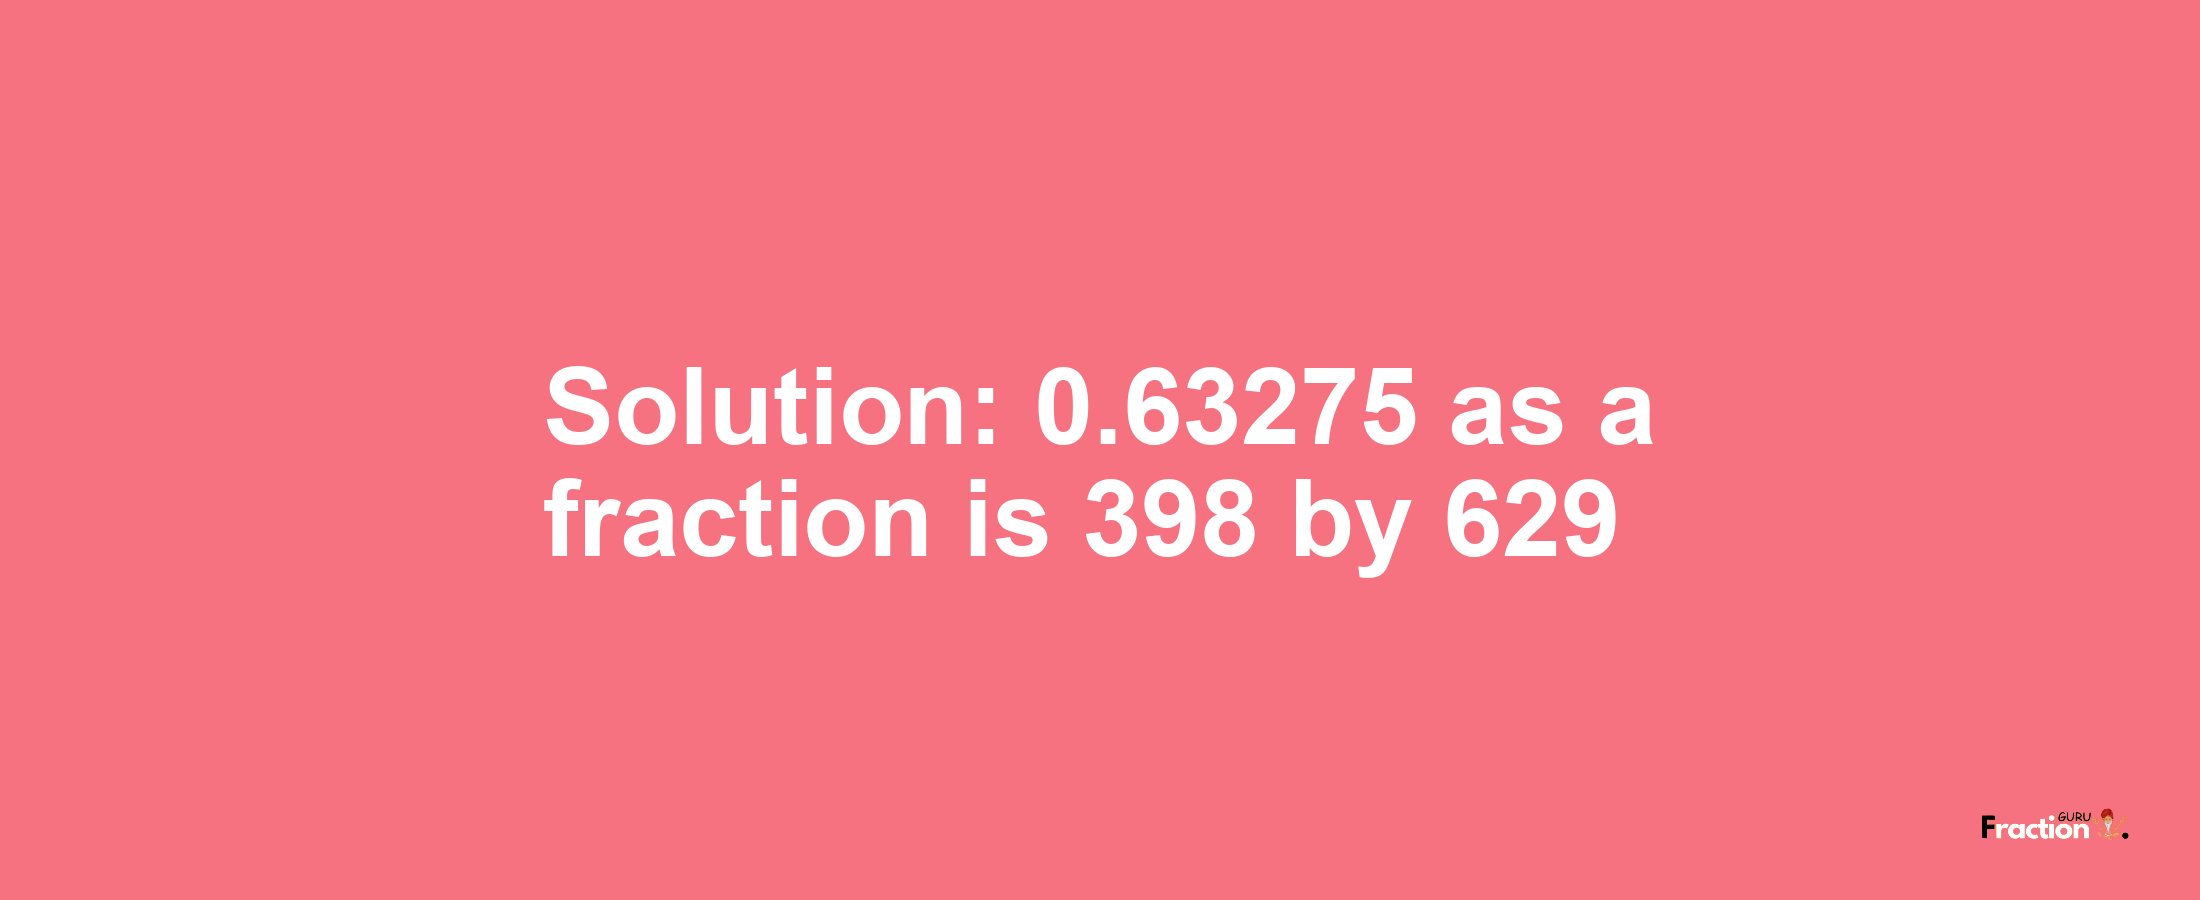 Solution:0.63275 as a fraction is 398/629